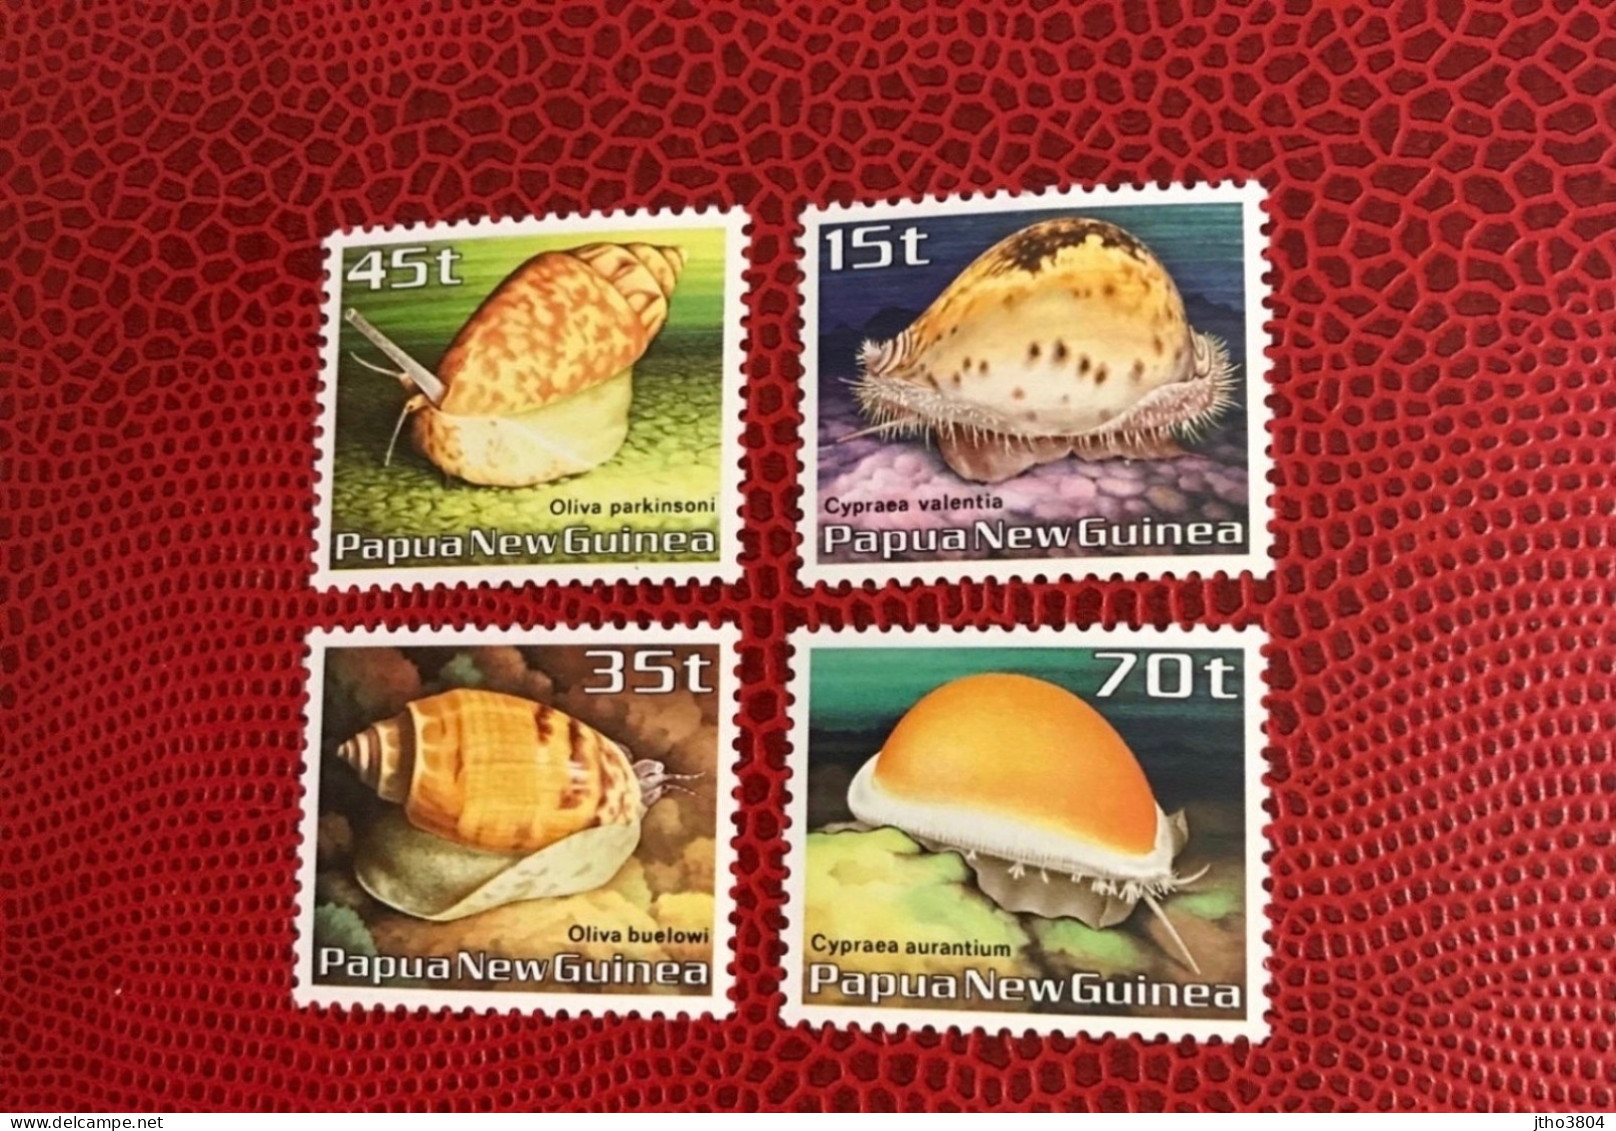 PAPOUASIE NOUVELLE GUINEE 1986 4v Neuf MNH ** Mi 516 / 519 Conchas Shells Muscheln Conchoglie PAPUA NEW GUINEA - Coquillages